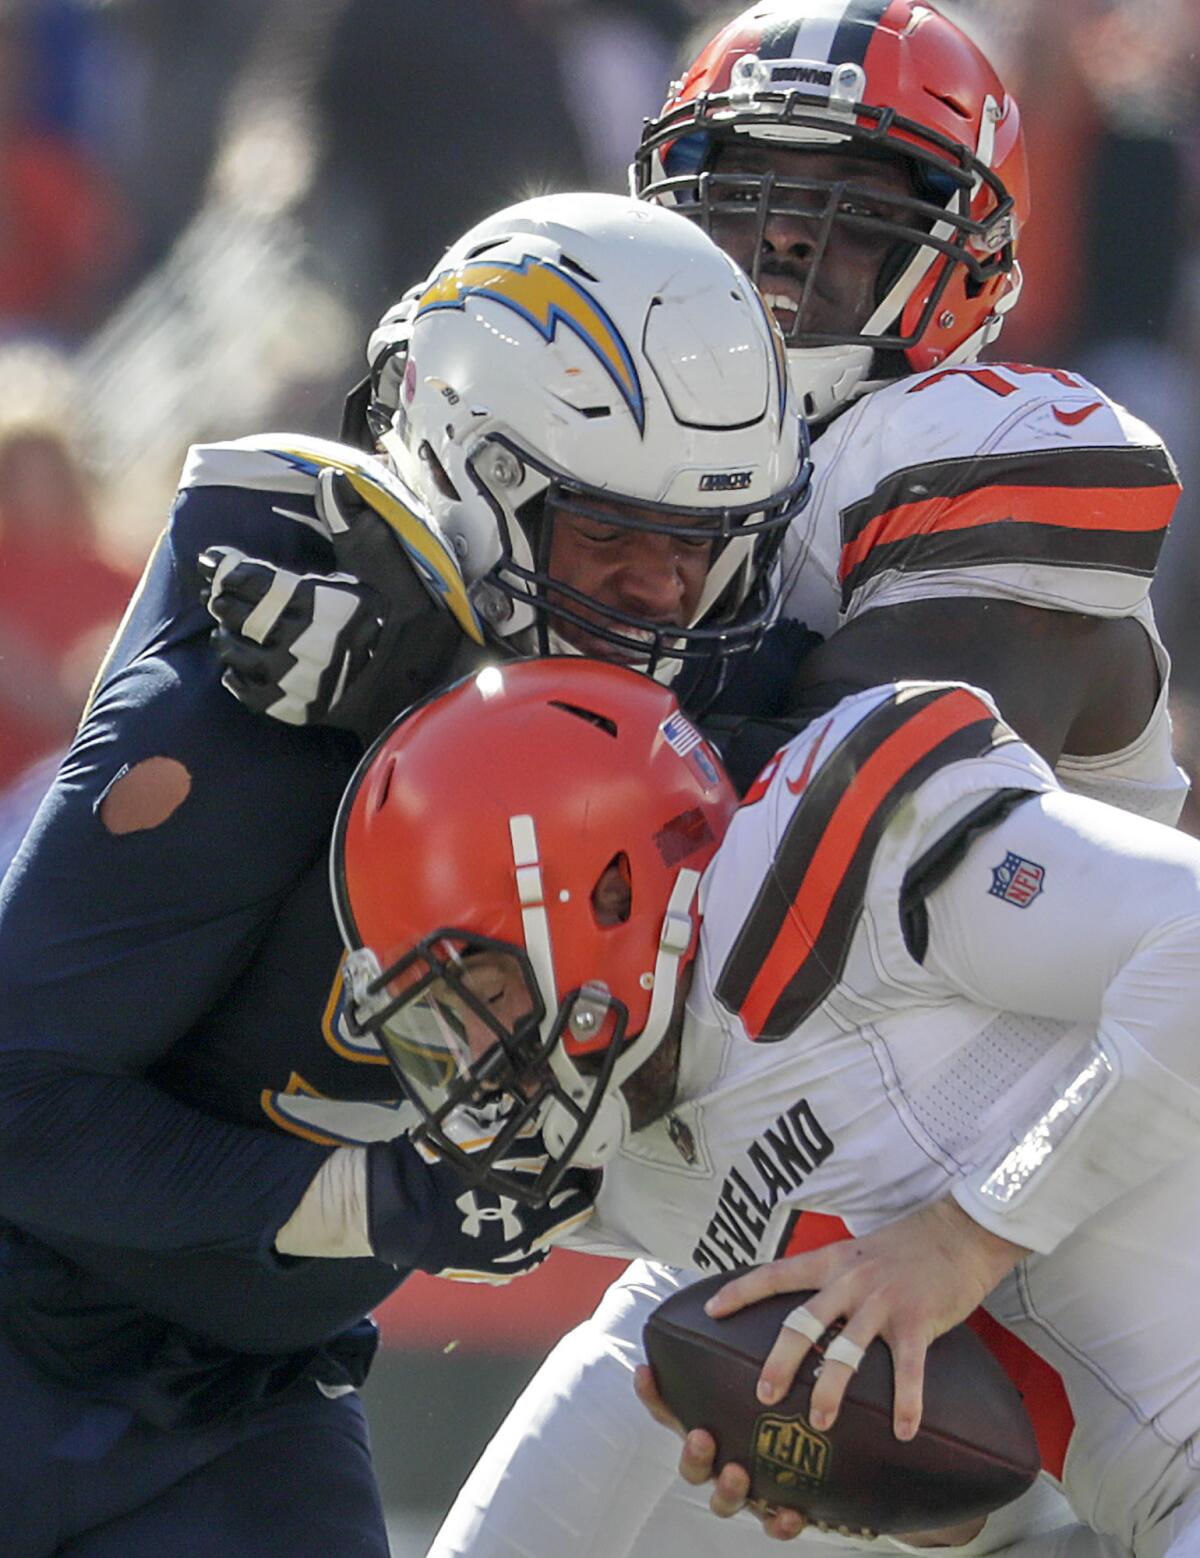 Chagers defensive lineaman Isaac Rochell sacks Cleveland Browns quarterback Baker Mayfield during second quarter action at Firstenergy Stadium on Sunday.